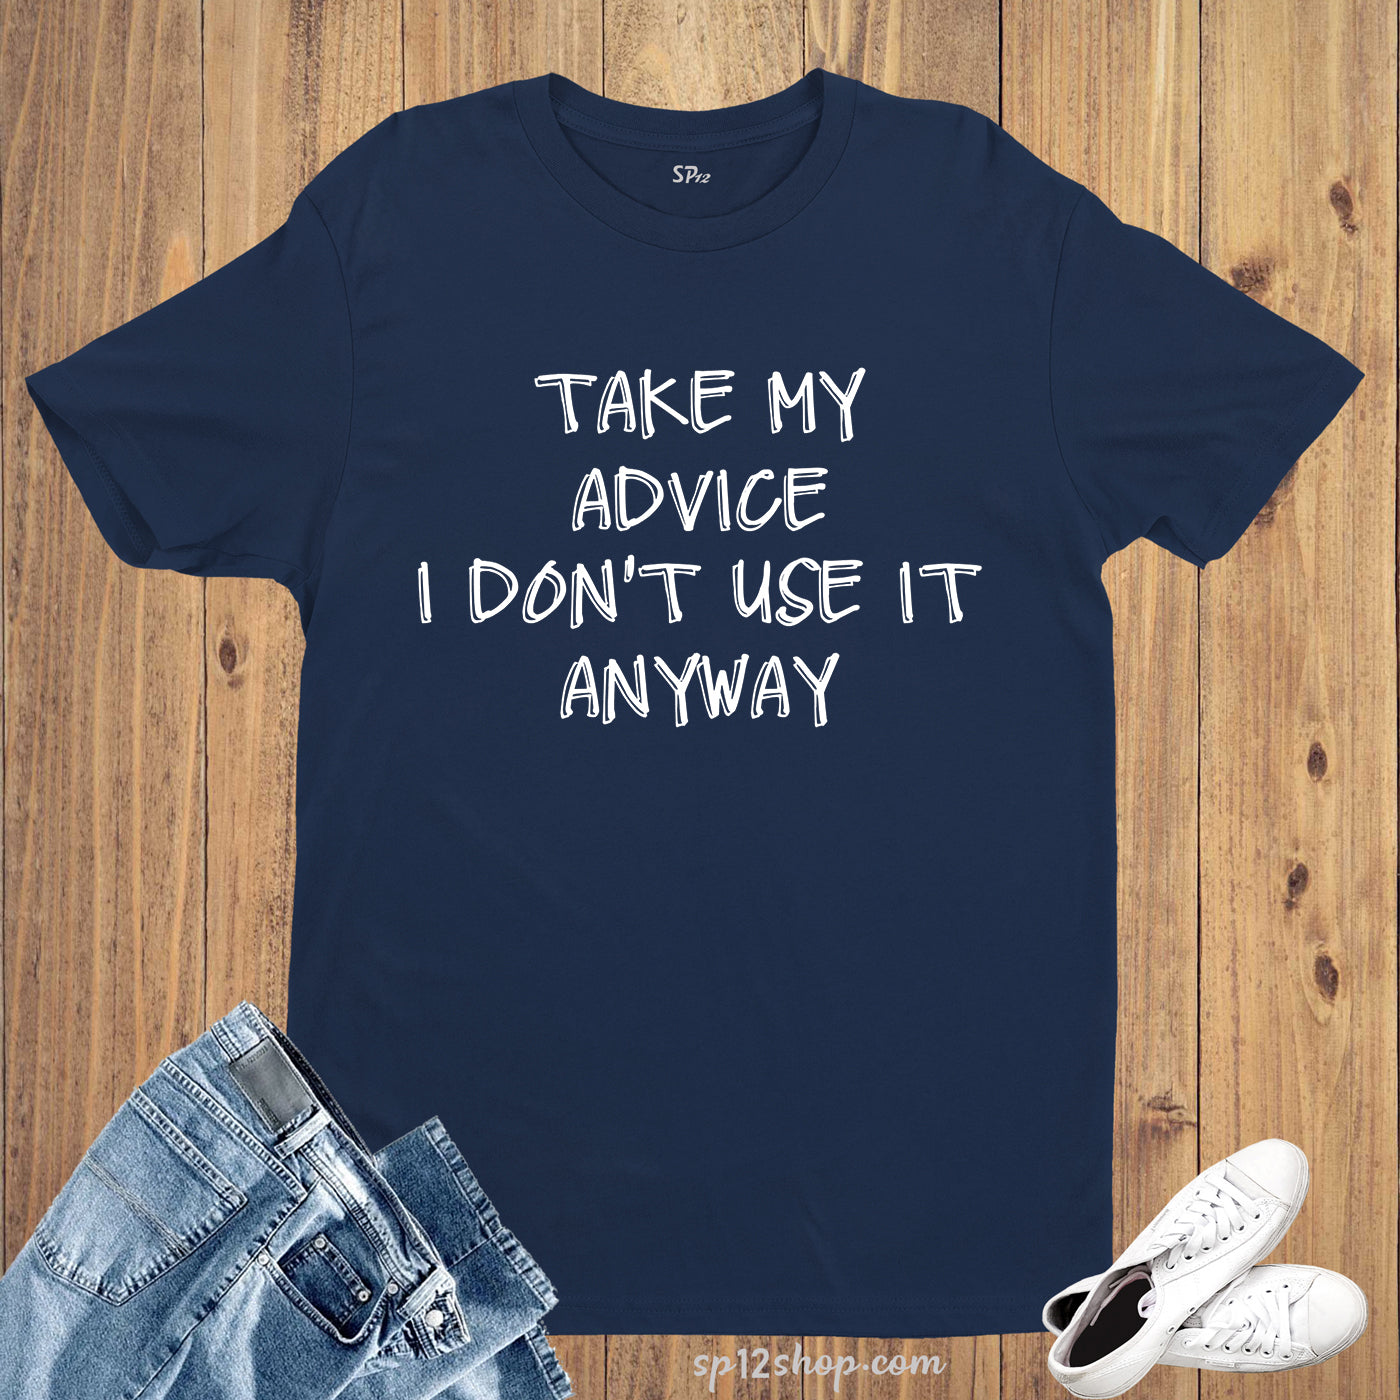 Take My Advice Funny Witty Hilarious Slogan T Shirt